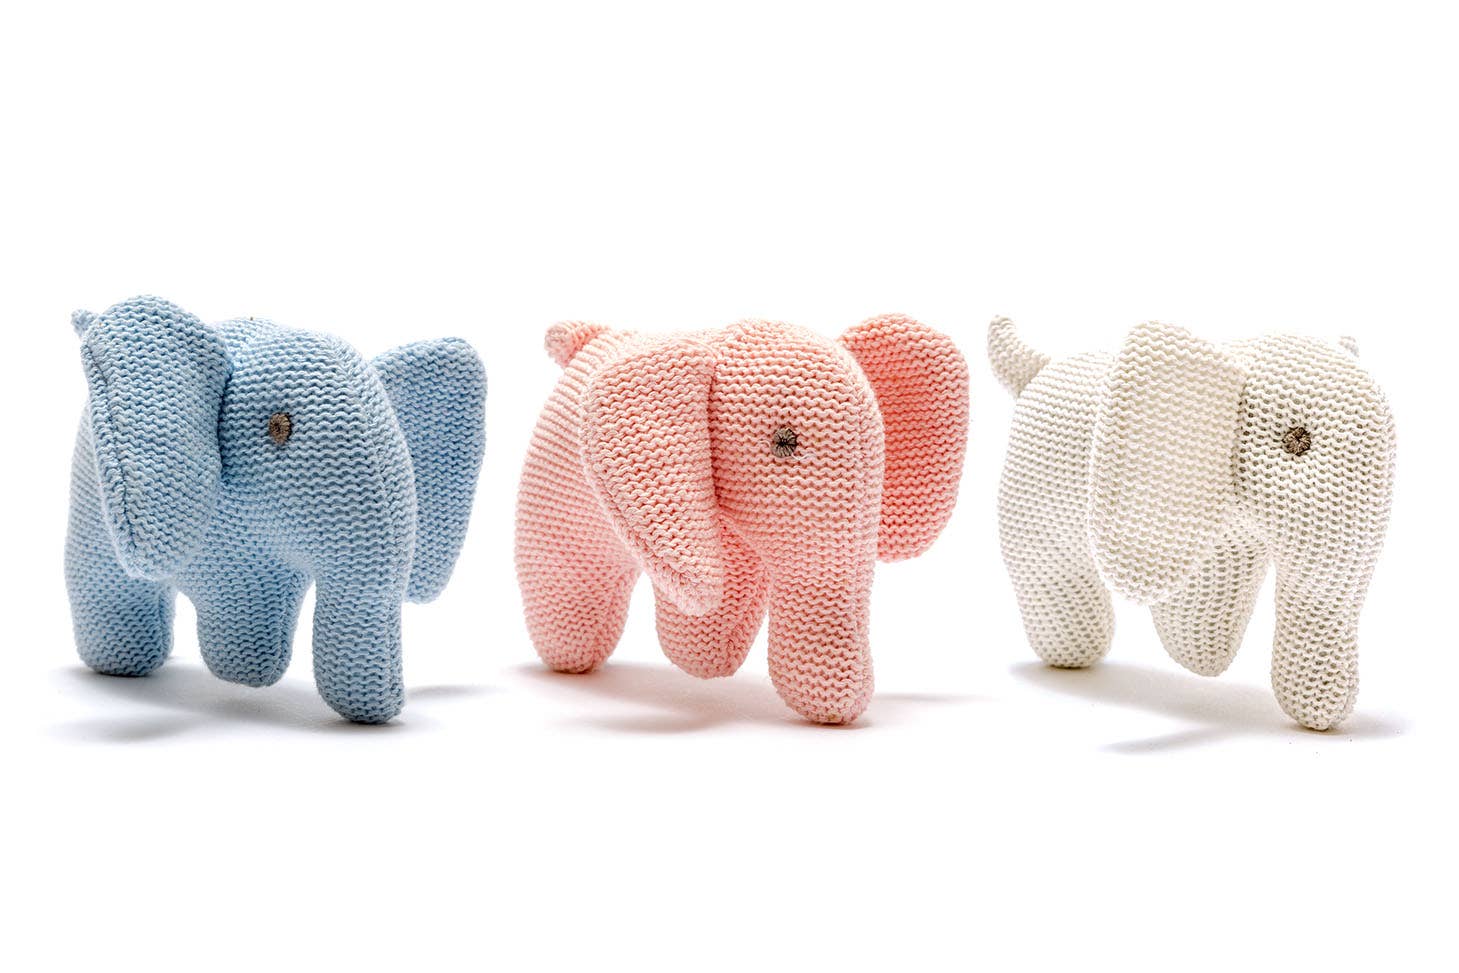 Knitted Organic Cotton Blue Elephant Baby Rattle